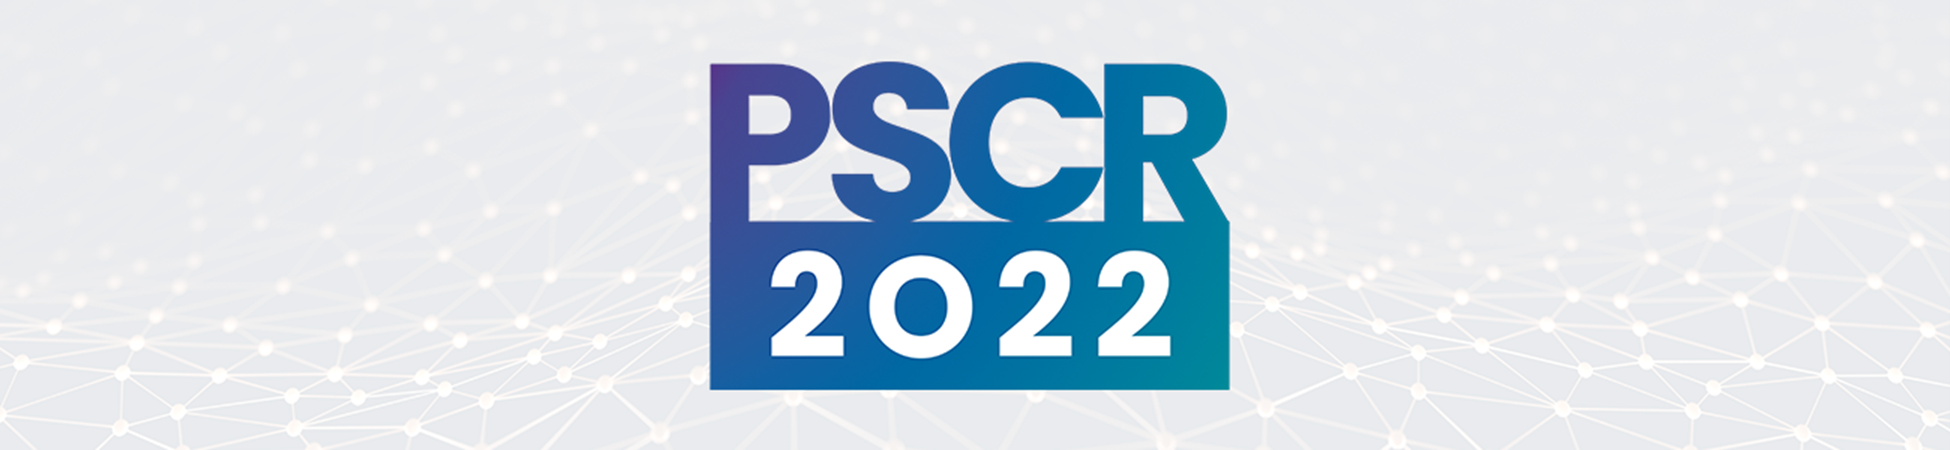 PSCR 2022